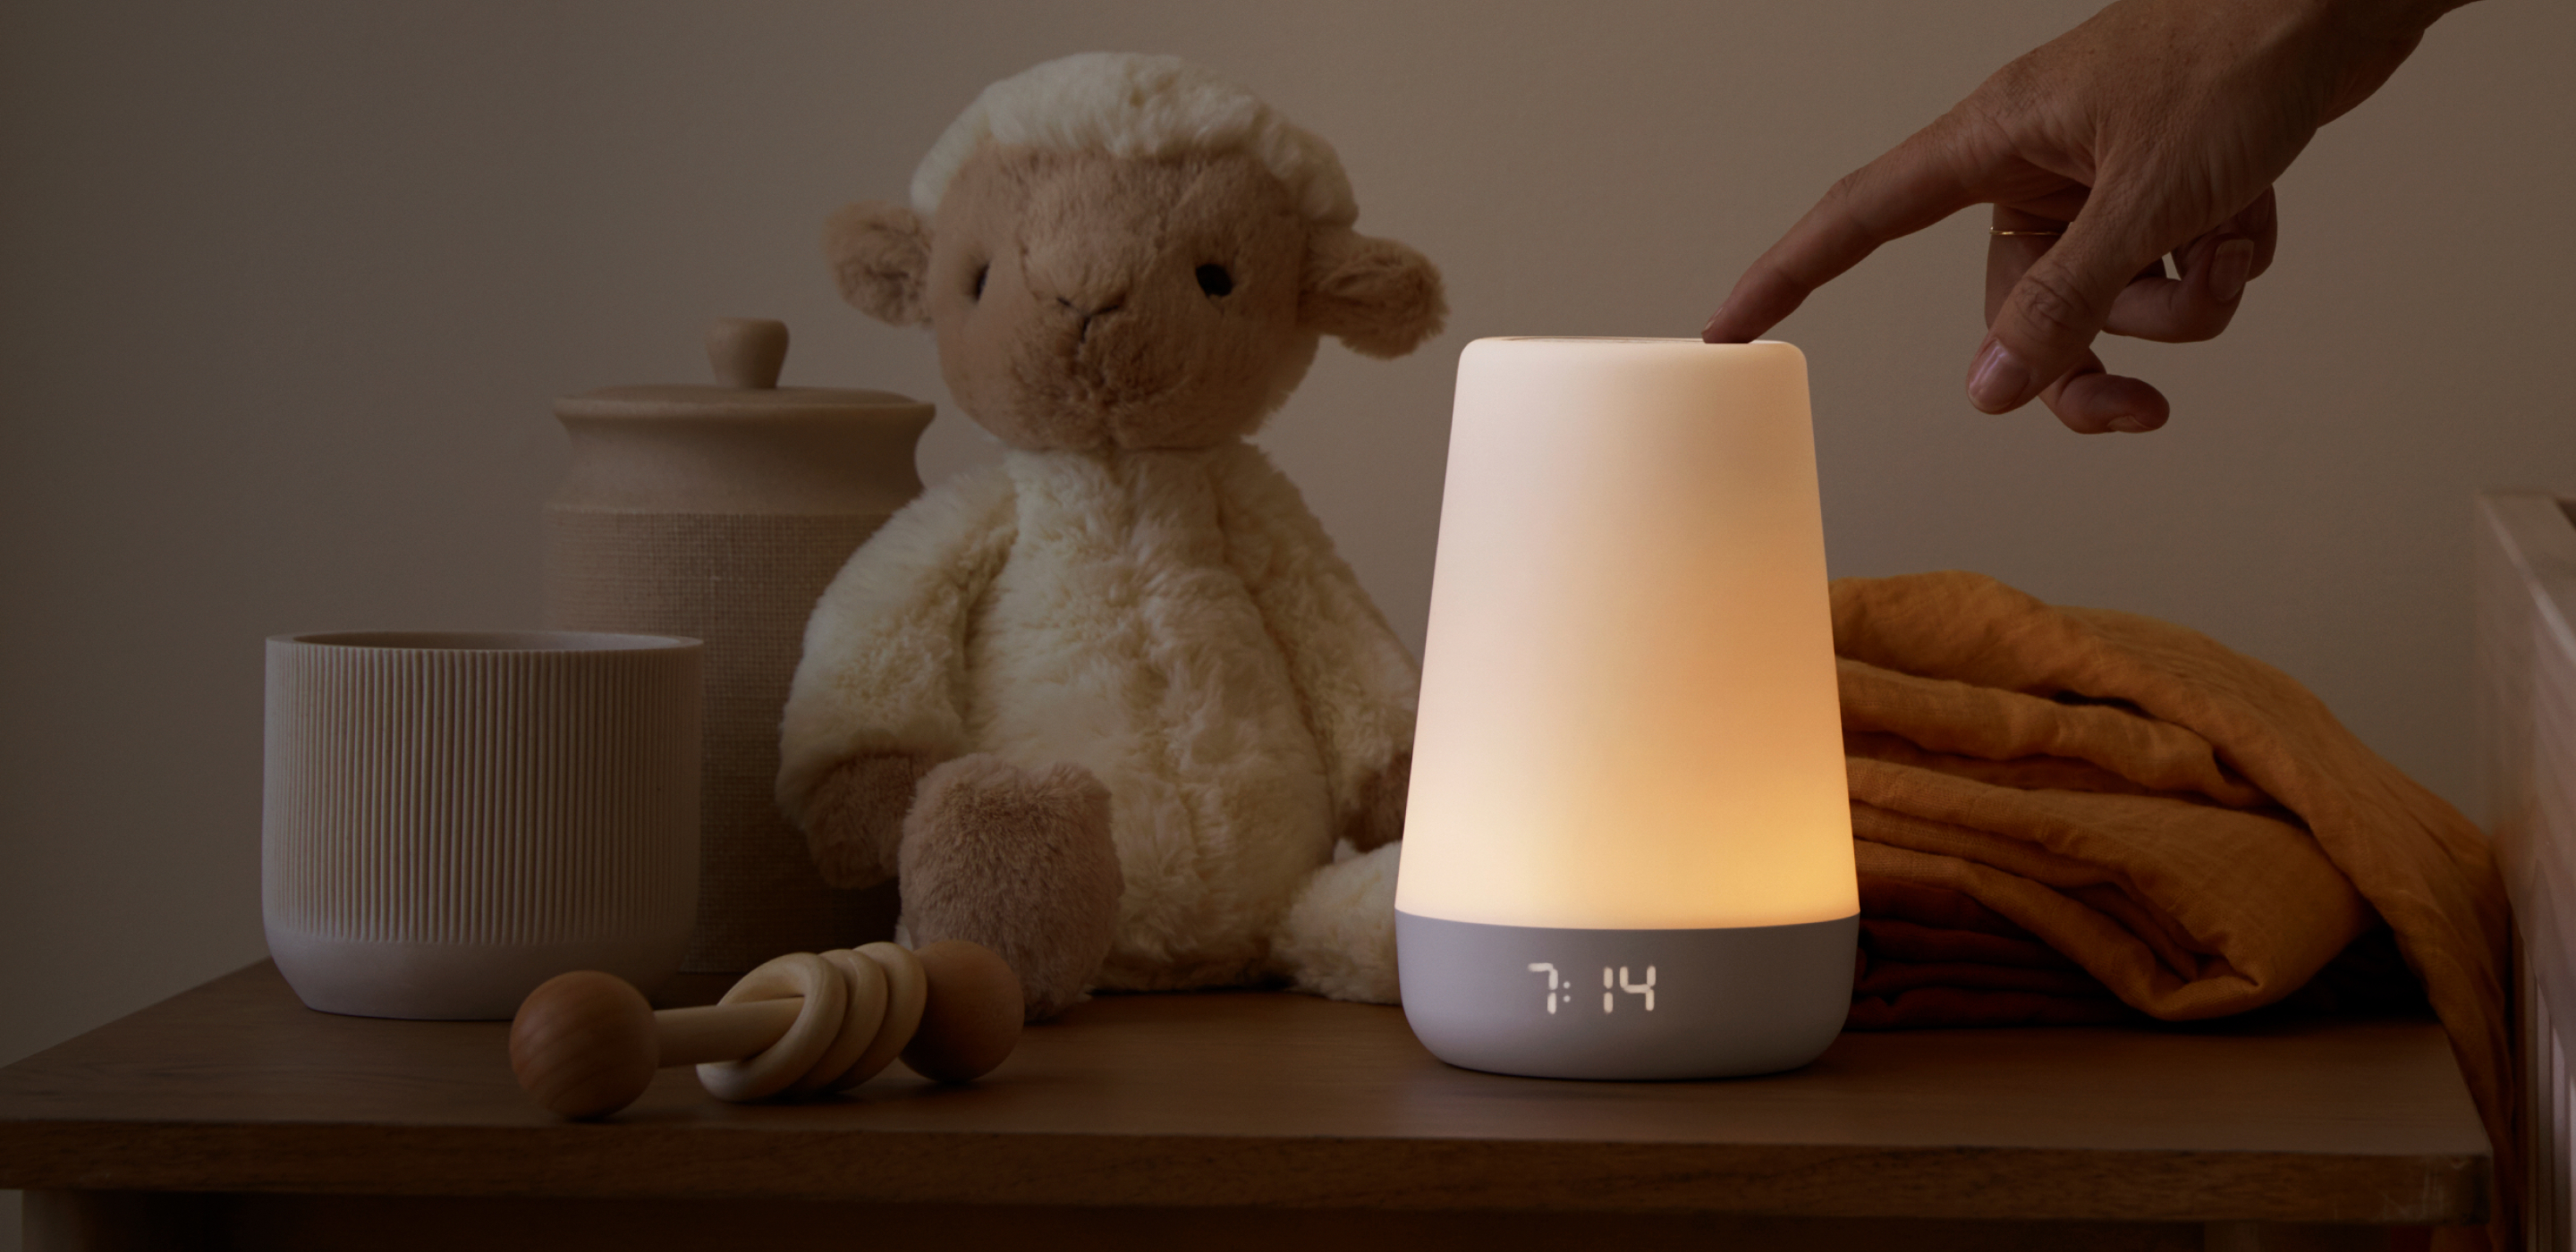 Hatch Rest 2nd generation - Night Light, Sound Machine, and Time-to-Rise